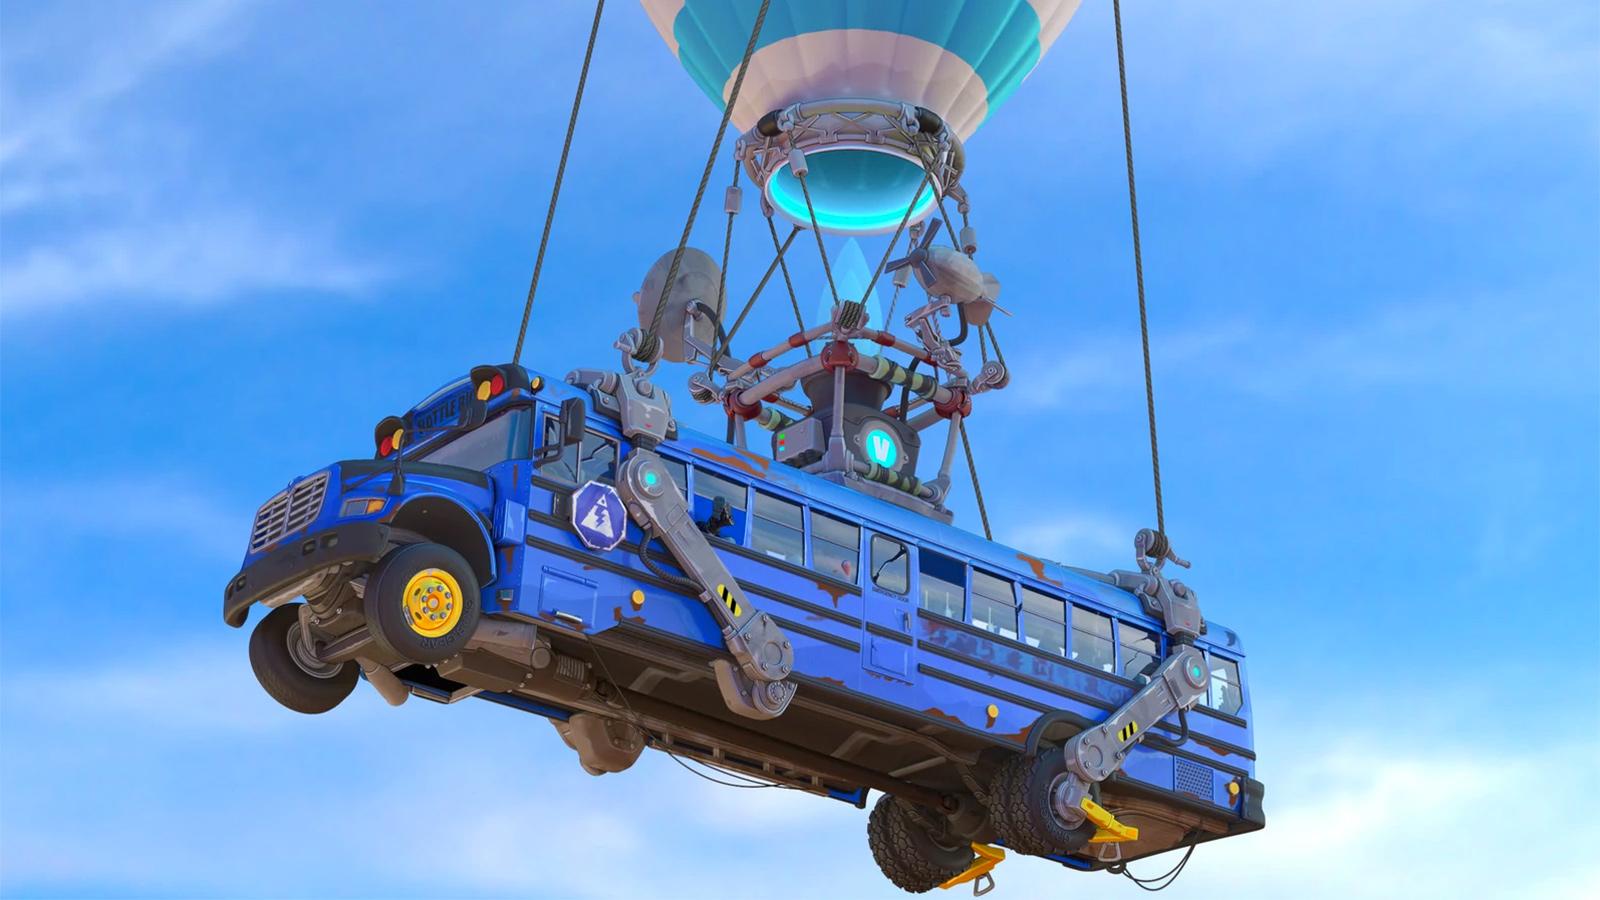 An image of the Battle Bus